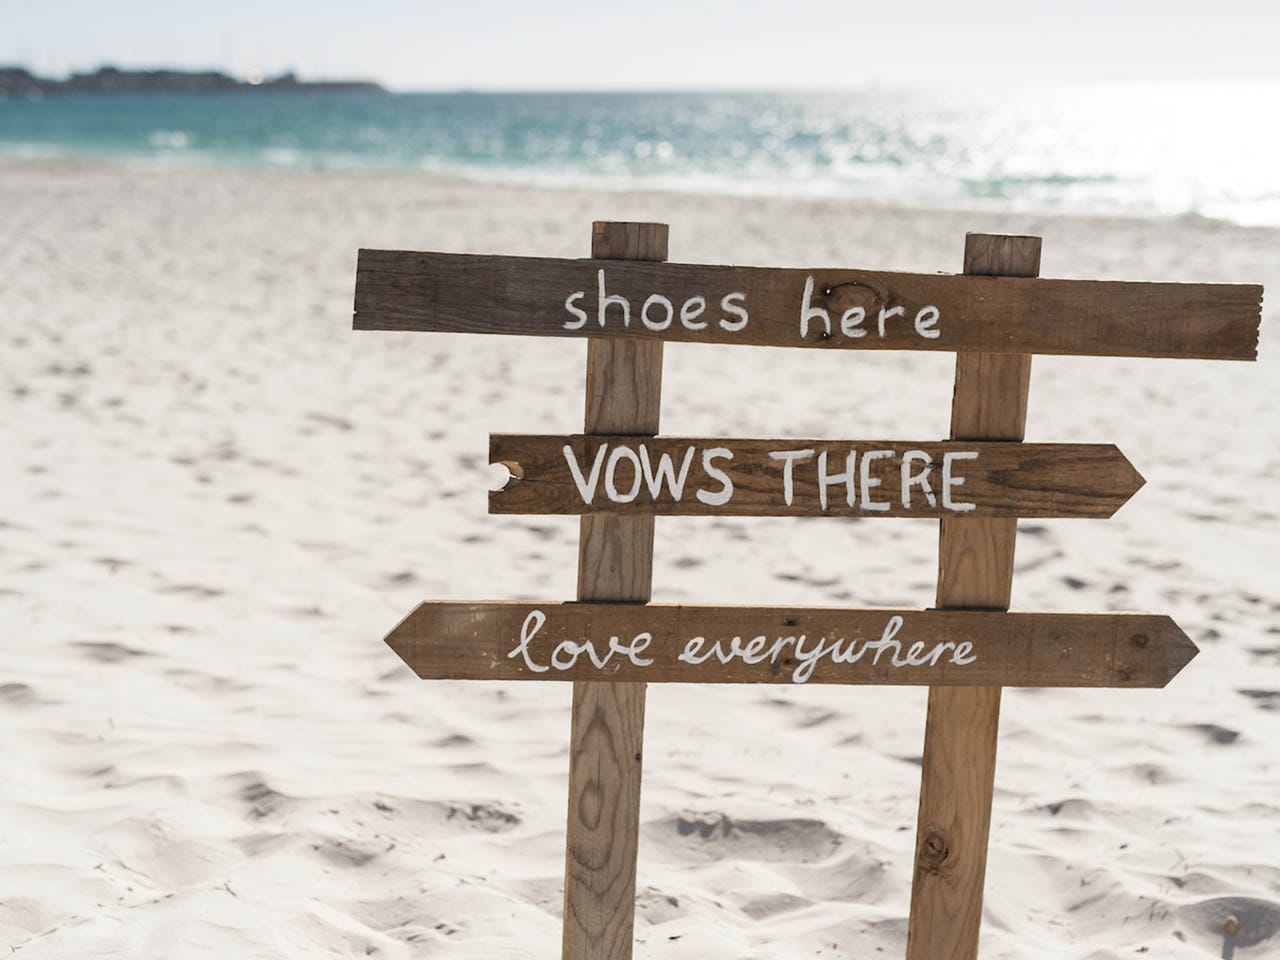 A Sign That Says Shoes Here, Vows There, Love Everywhere.